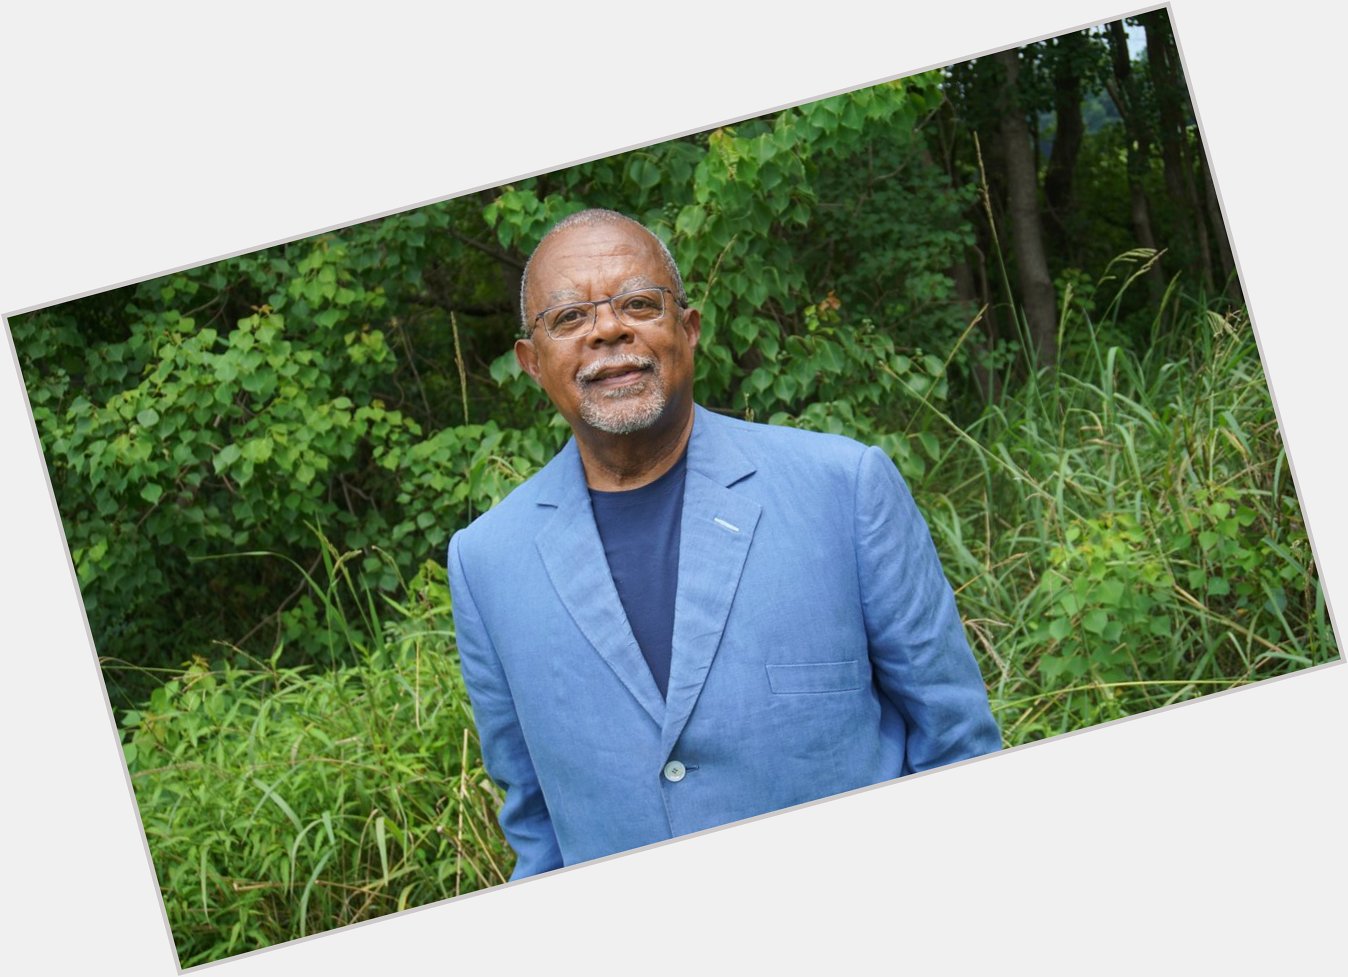 Join us in wishing Jr. a happy birthday! What is your favorite film by Henry Louis Gates, Jr.? 